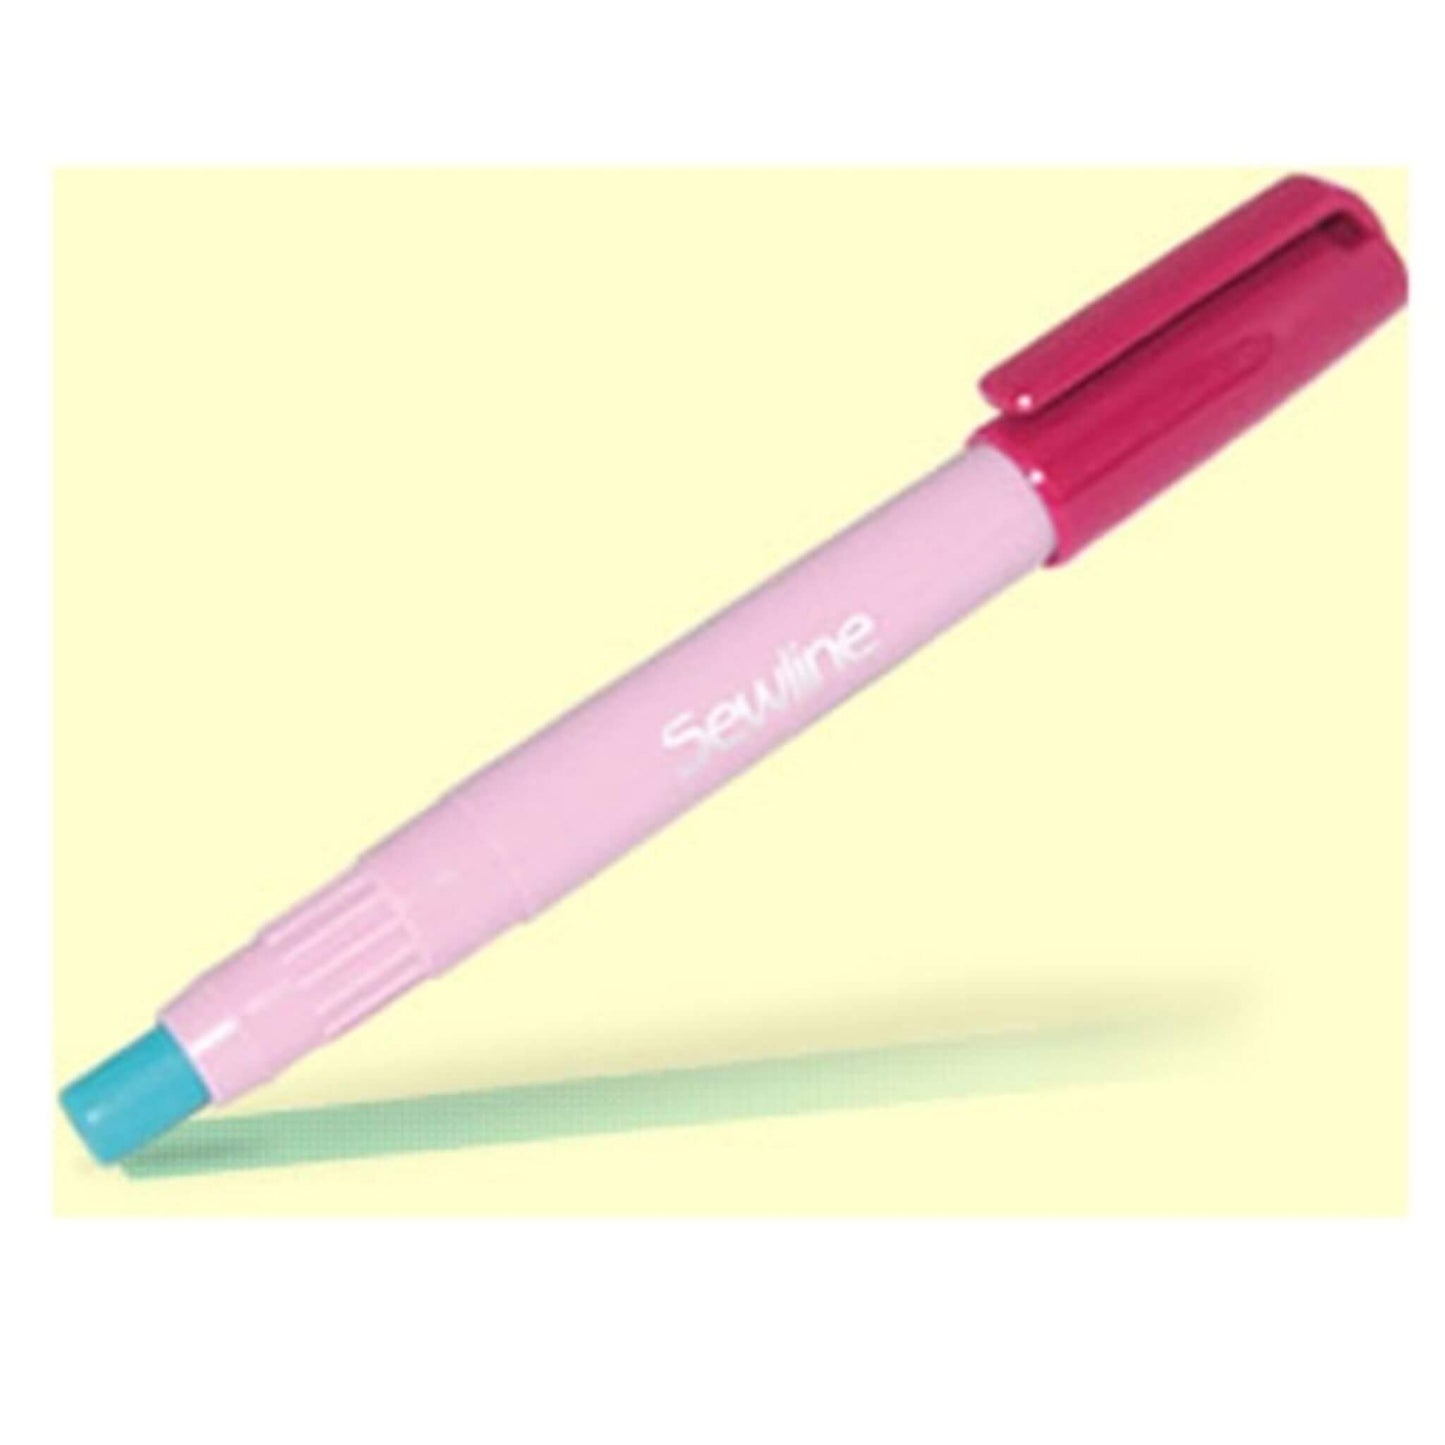 Glue Pen by Sewline with two blue refills